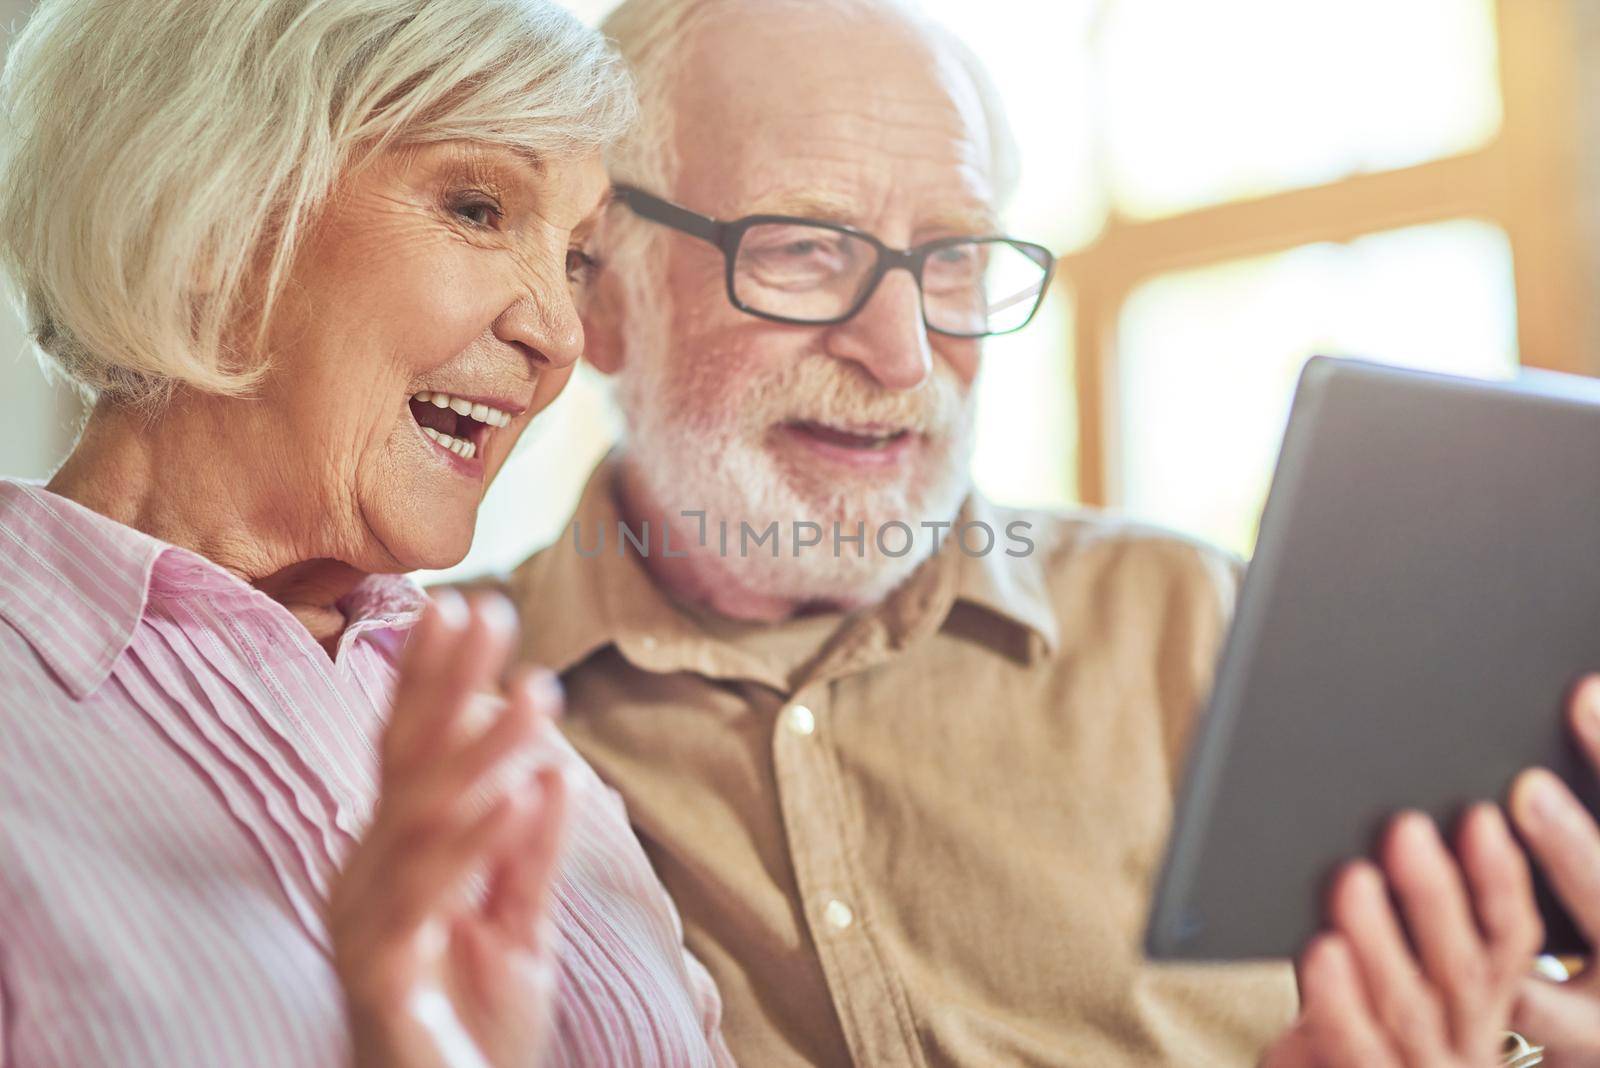 Smiling elder woman waving during video call near her husband by friendsstock